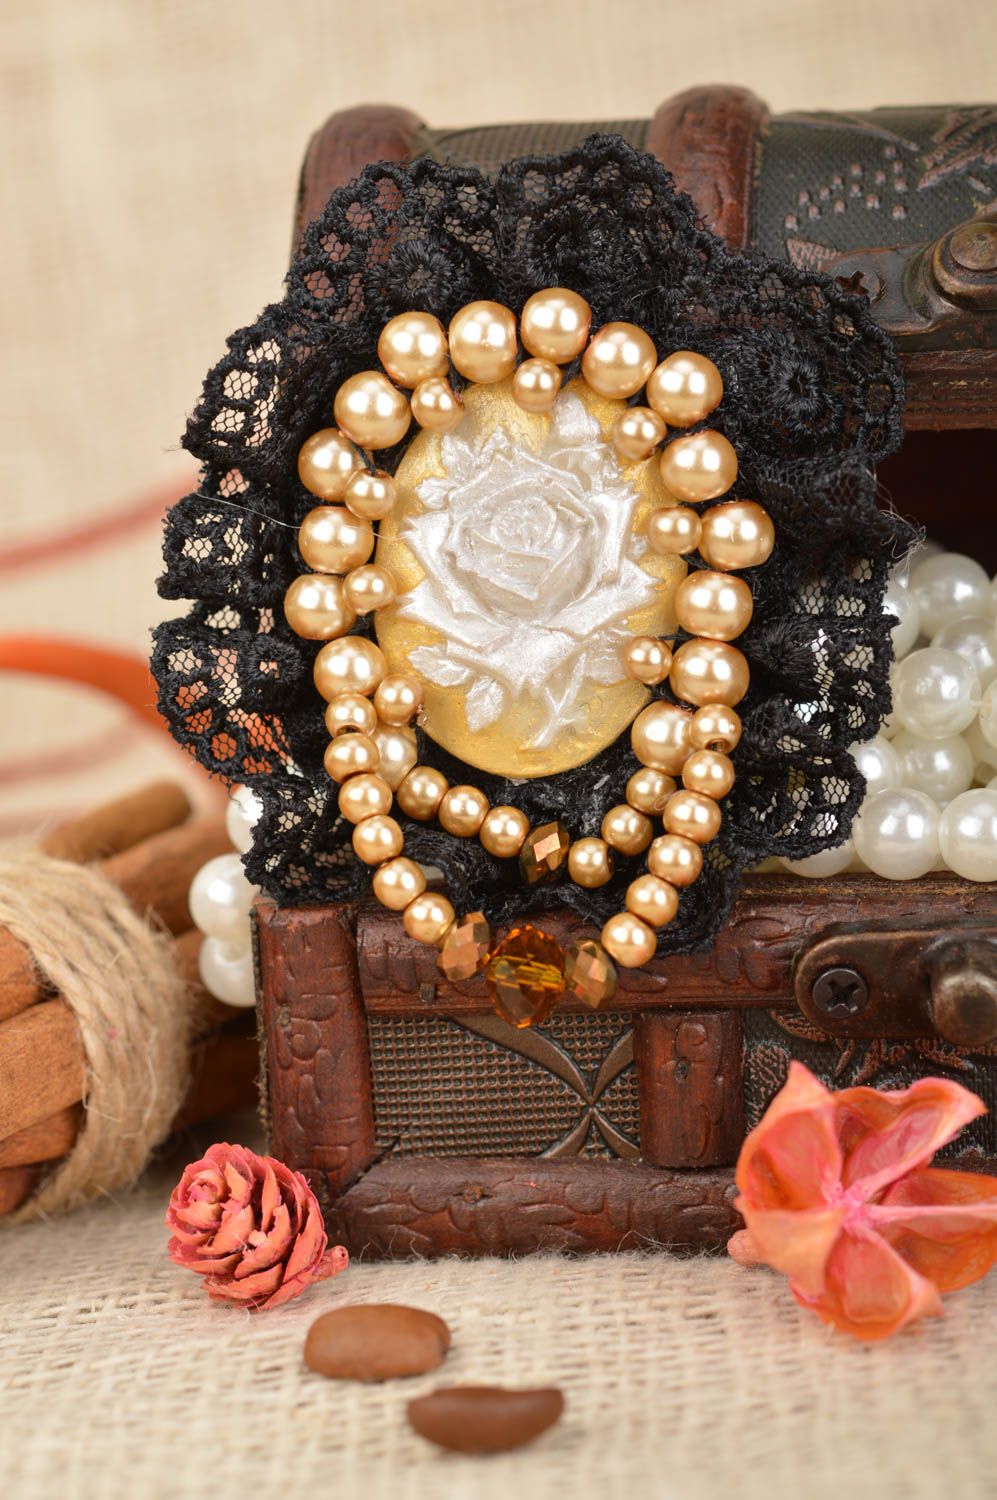 Unusual handmade designer cameo brooch with lace and beads in vintage style photo 1